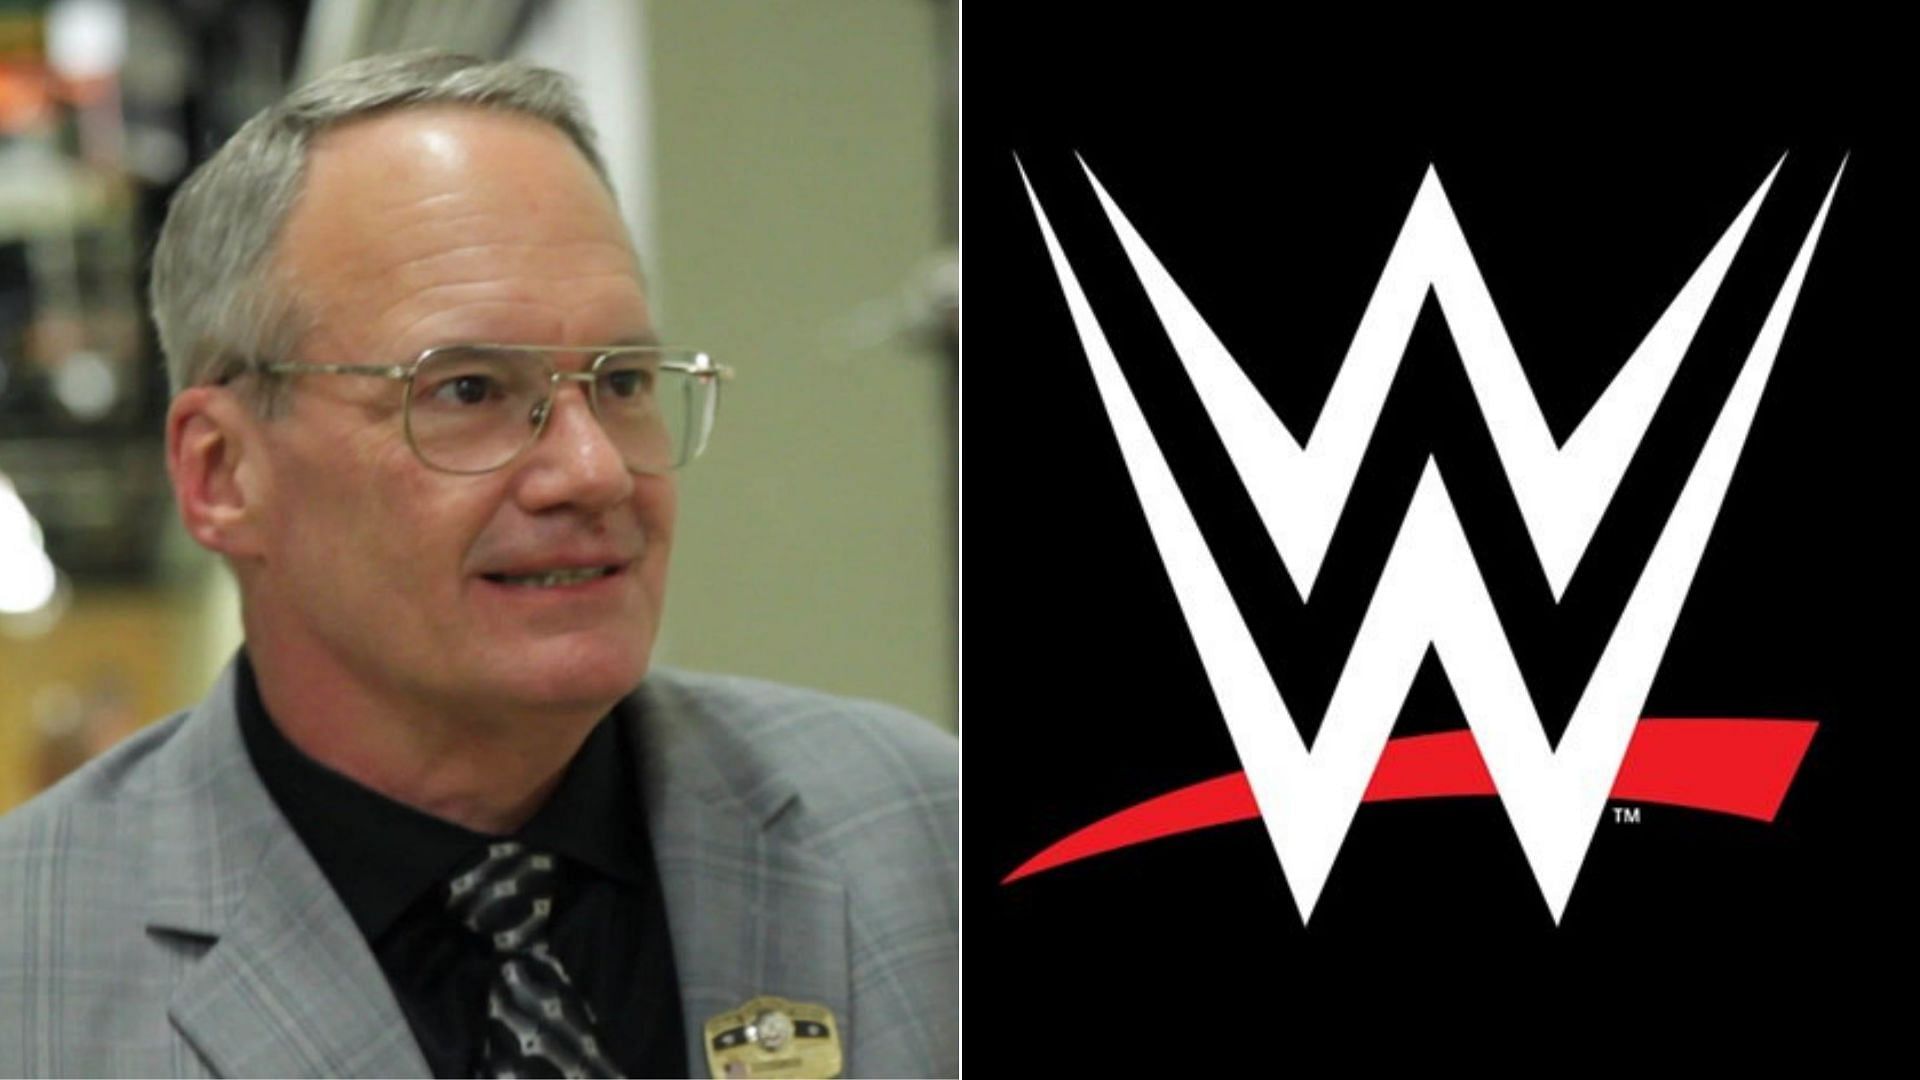 Jim Cornette feels that a top star has good mic skills which would make him a good authority figure